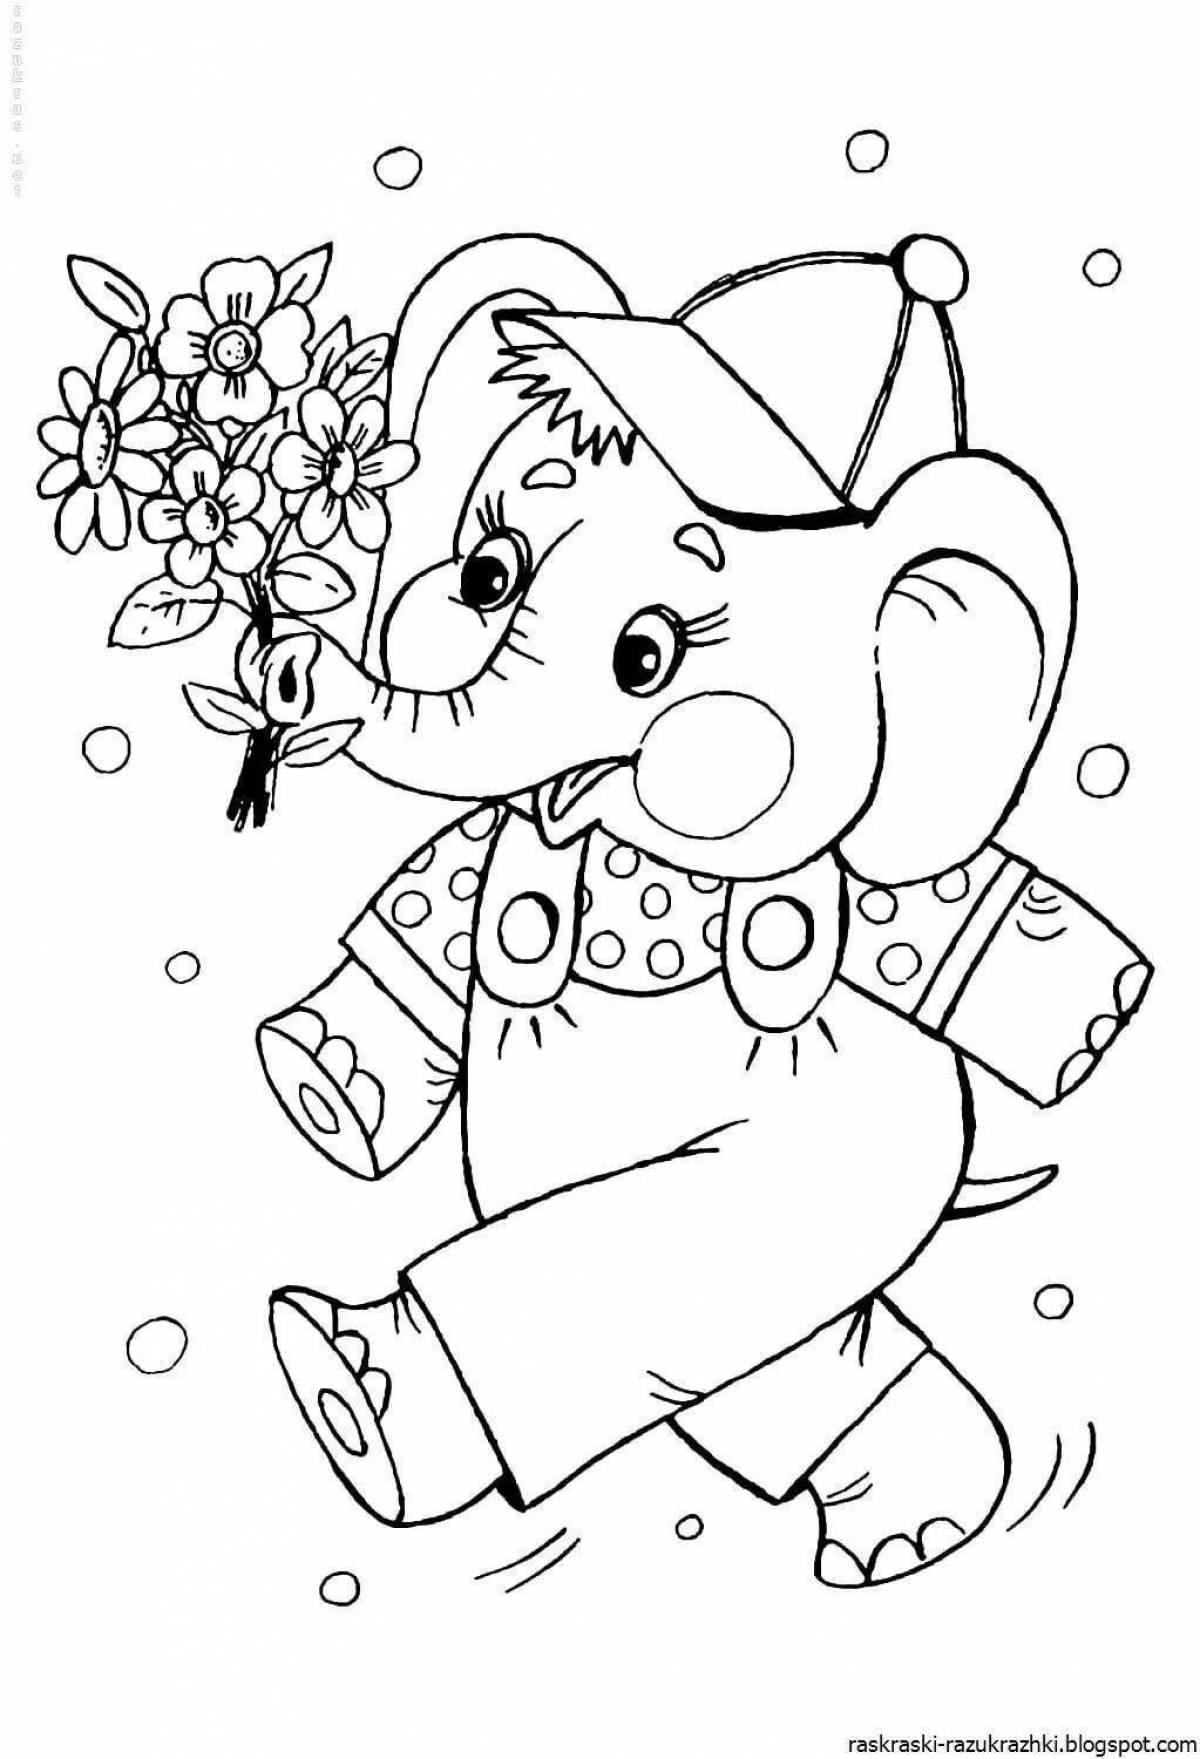 Adorable coloring book for kids 6-8 years old